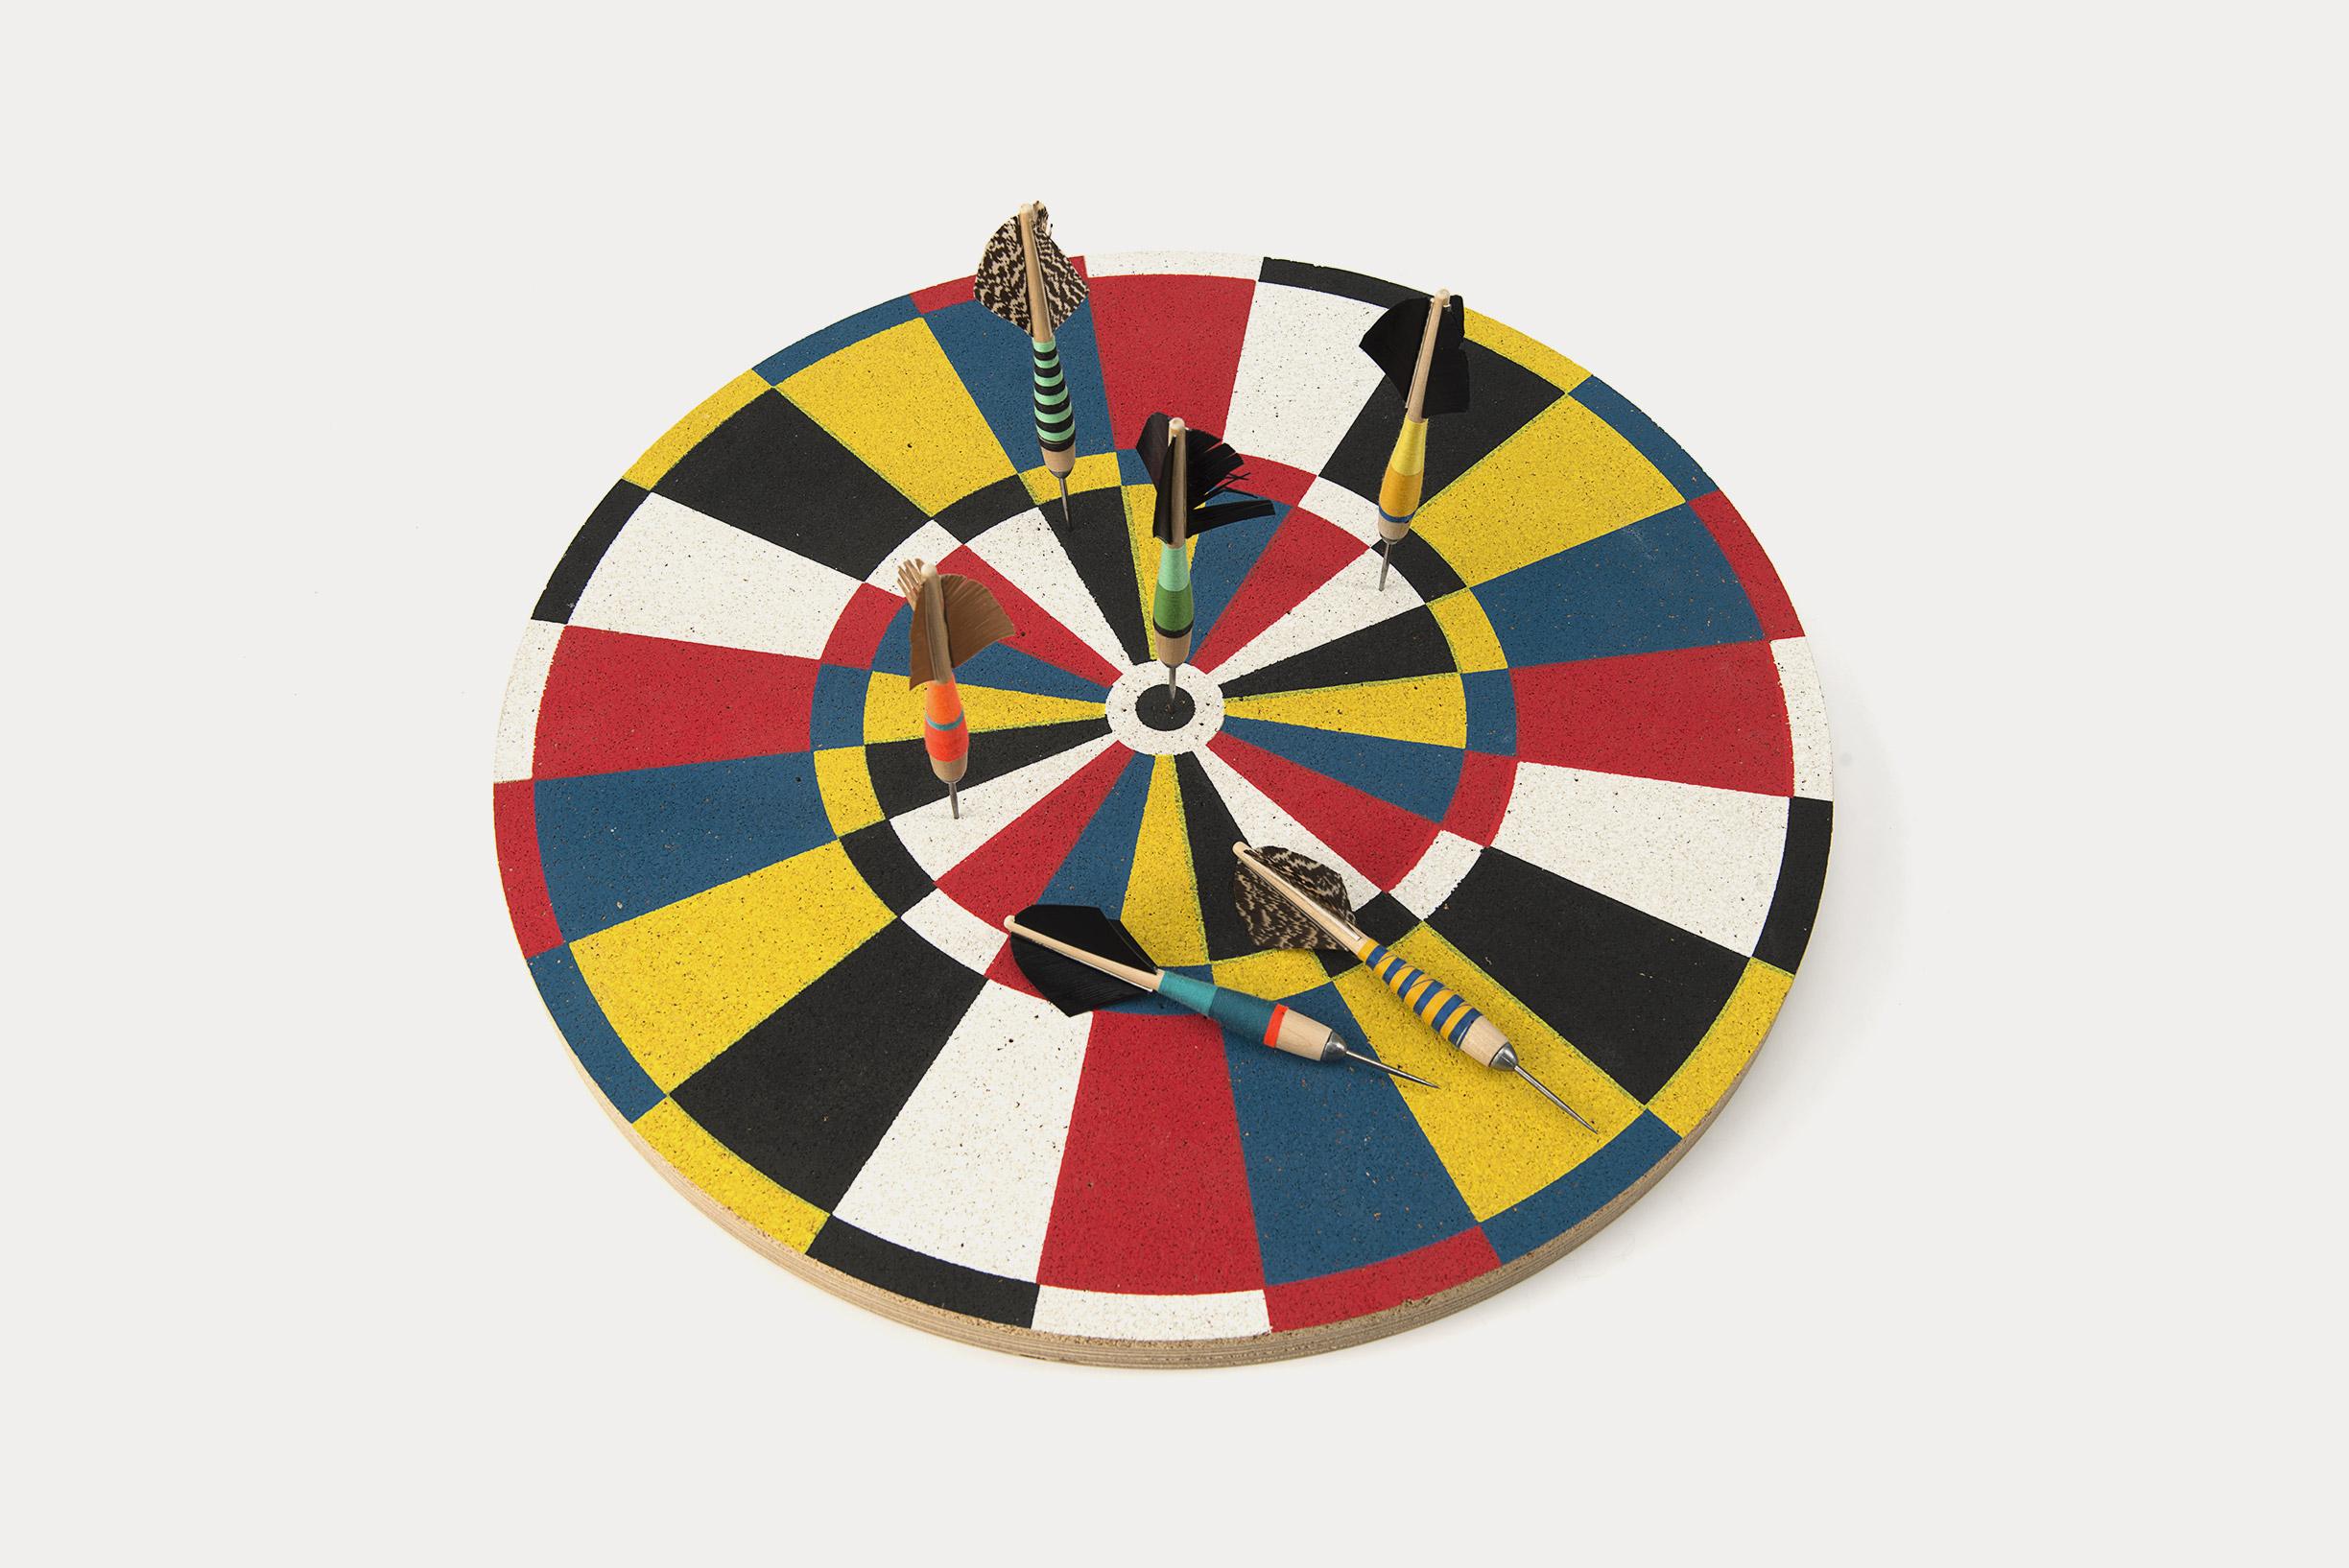 Five-color silk-screened cork with a key hole on the back for easy hanging. Makes a wonderful wall accessory.

The dartboard may have its origins in the cross-section of a tree - as the wood dried, cracks would develop, creating 